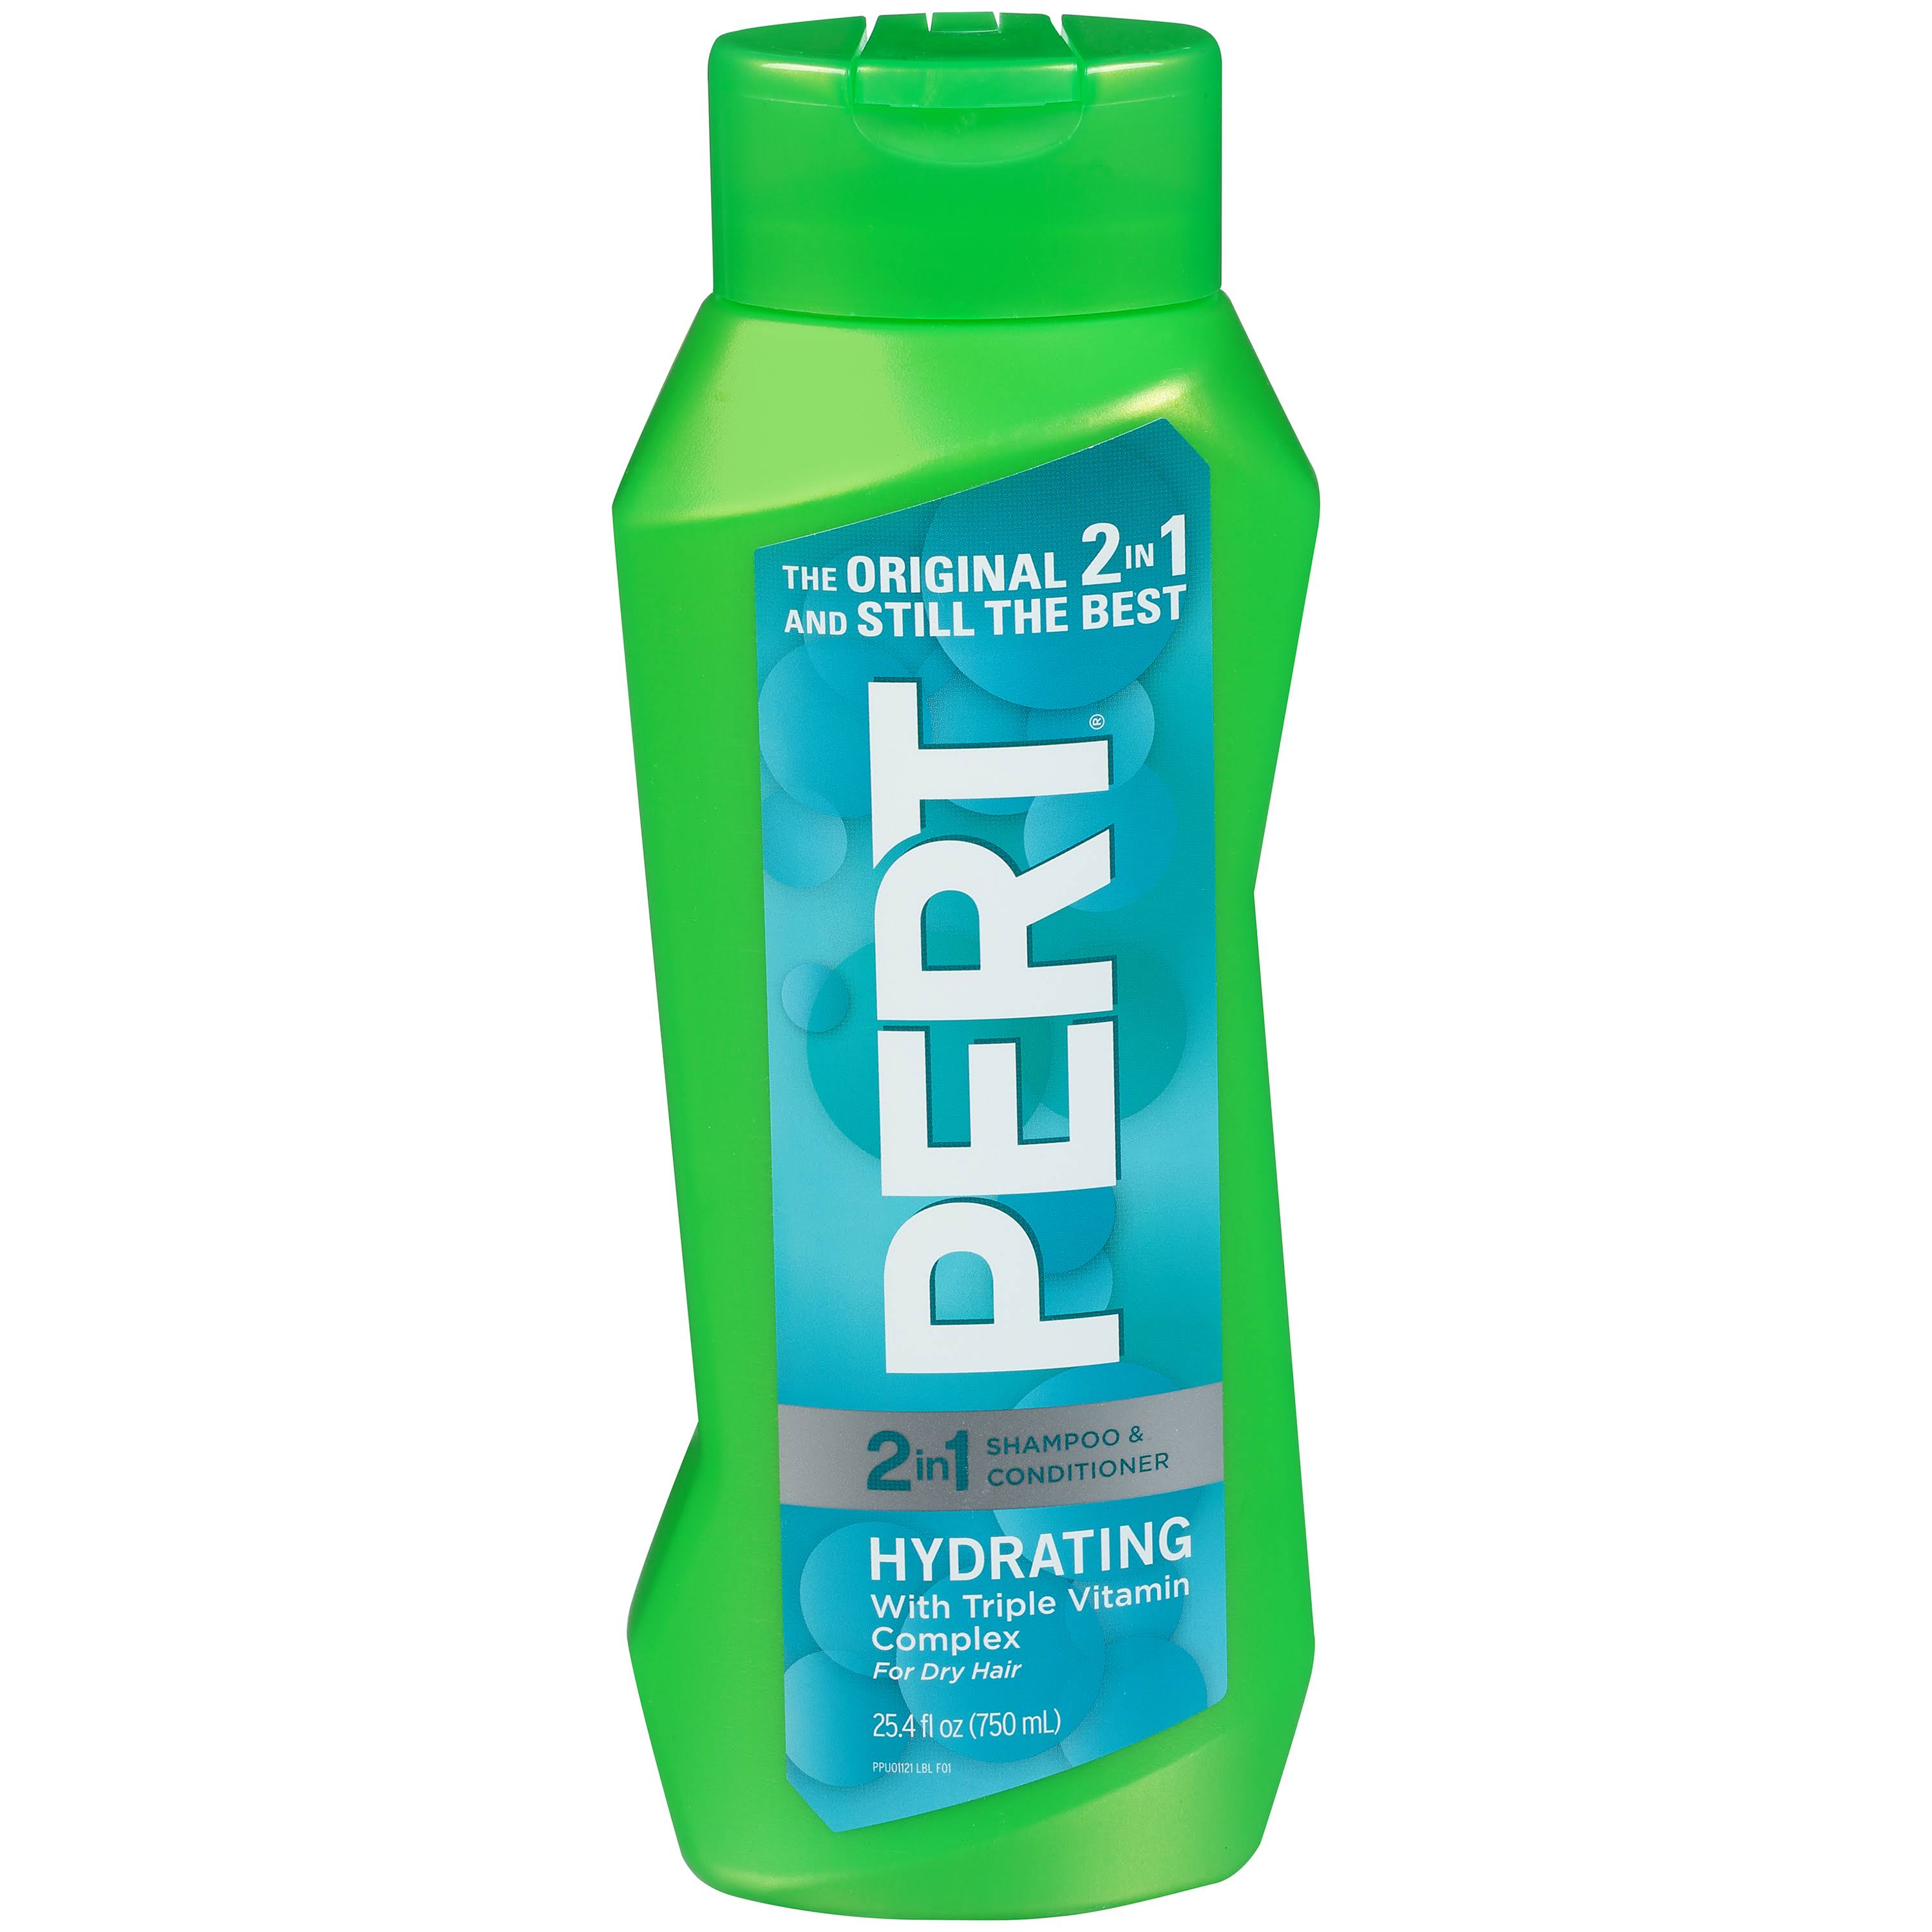 Pert Hydrating 2in1 Shampoo and Conditioner - 25.4oz